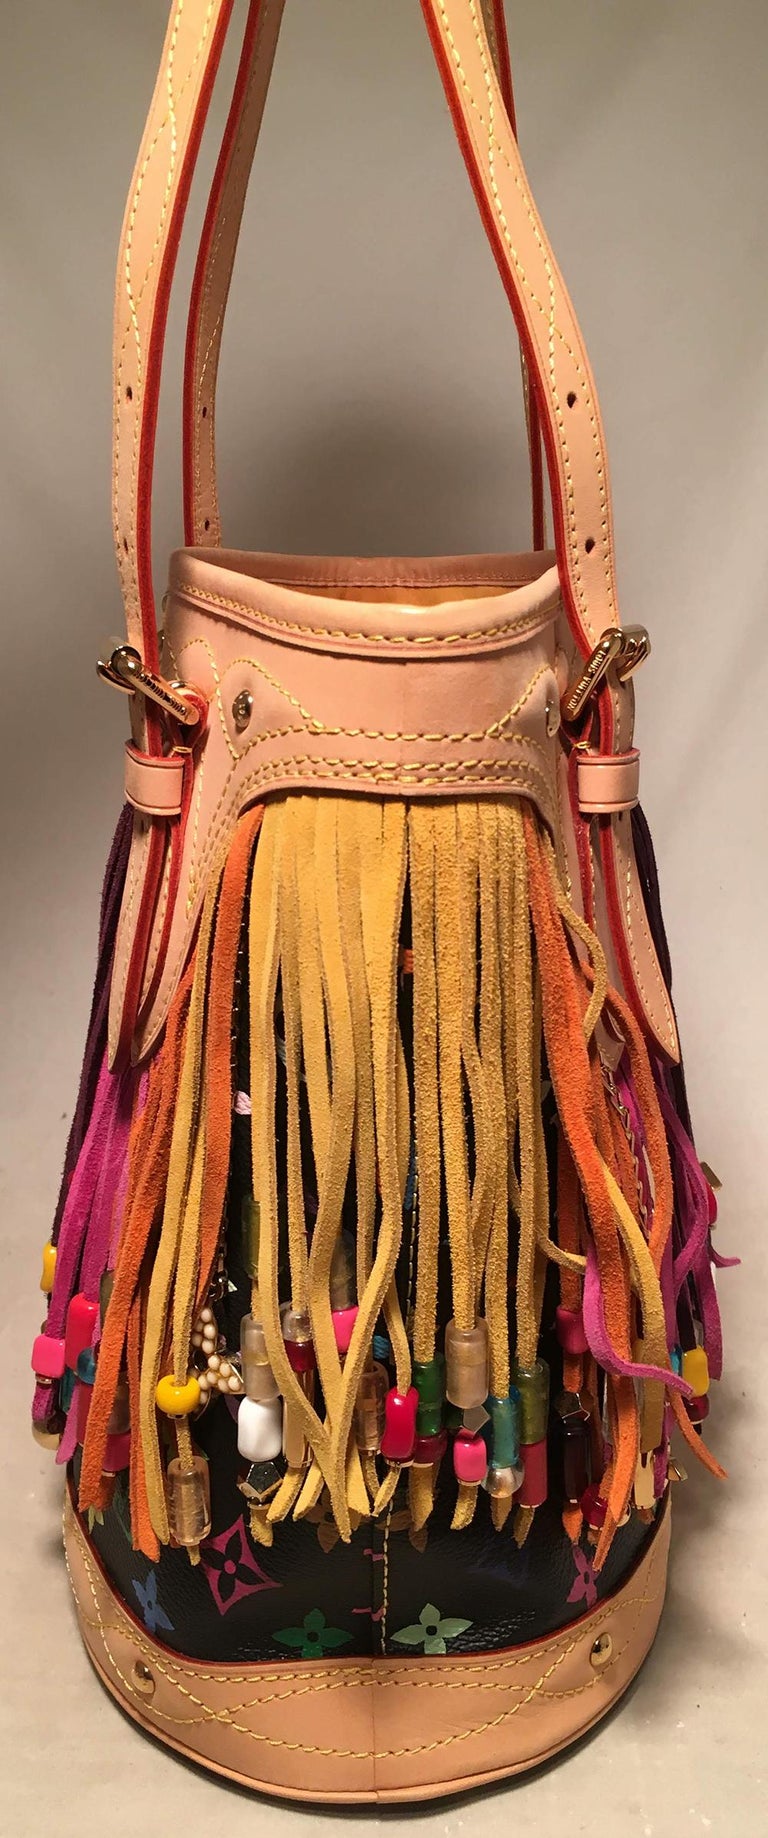 Louis Vuitton Limited Edition Black Monogram Multicolor Fringe Bucket Bag with at 1stdibs